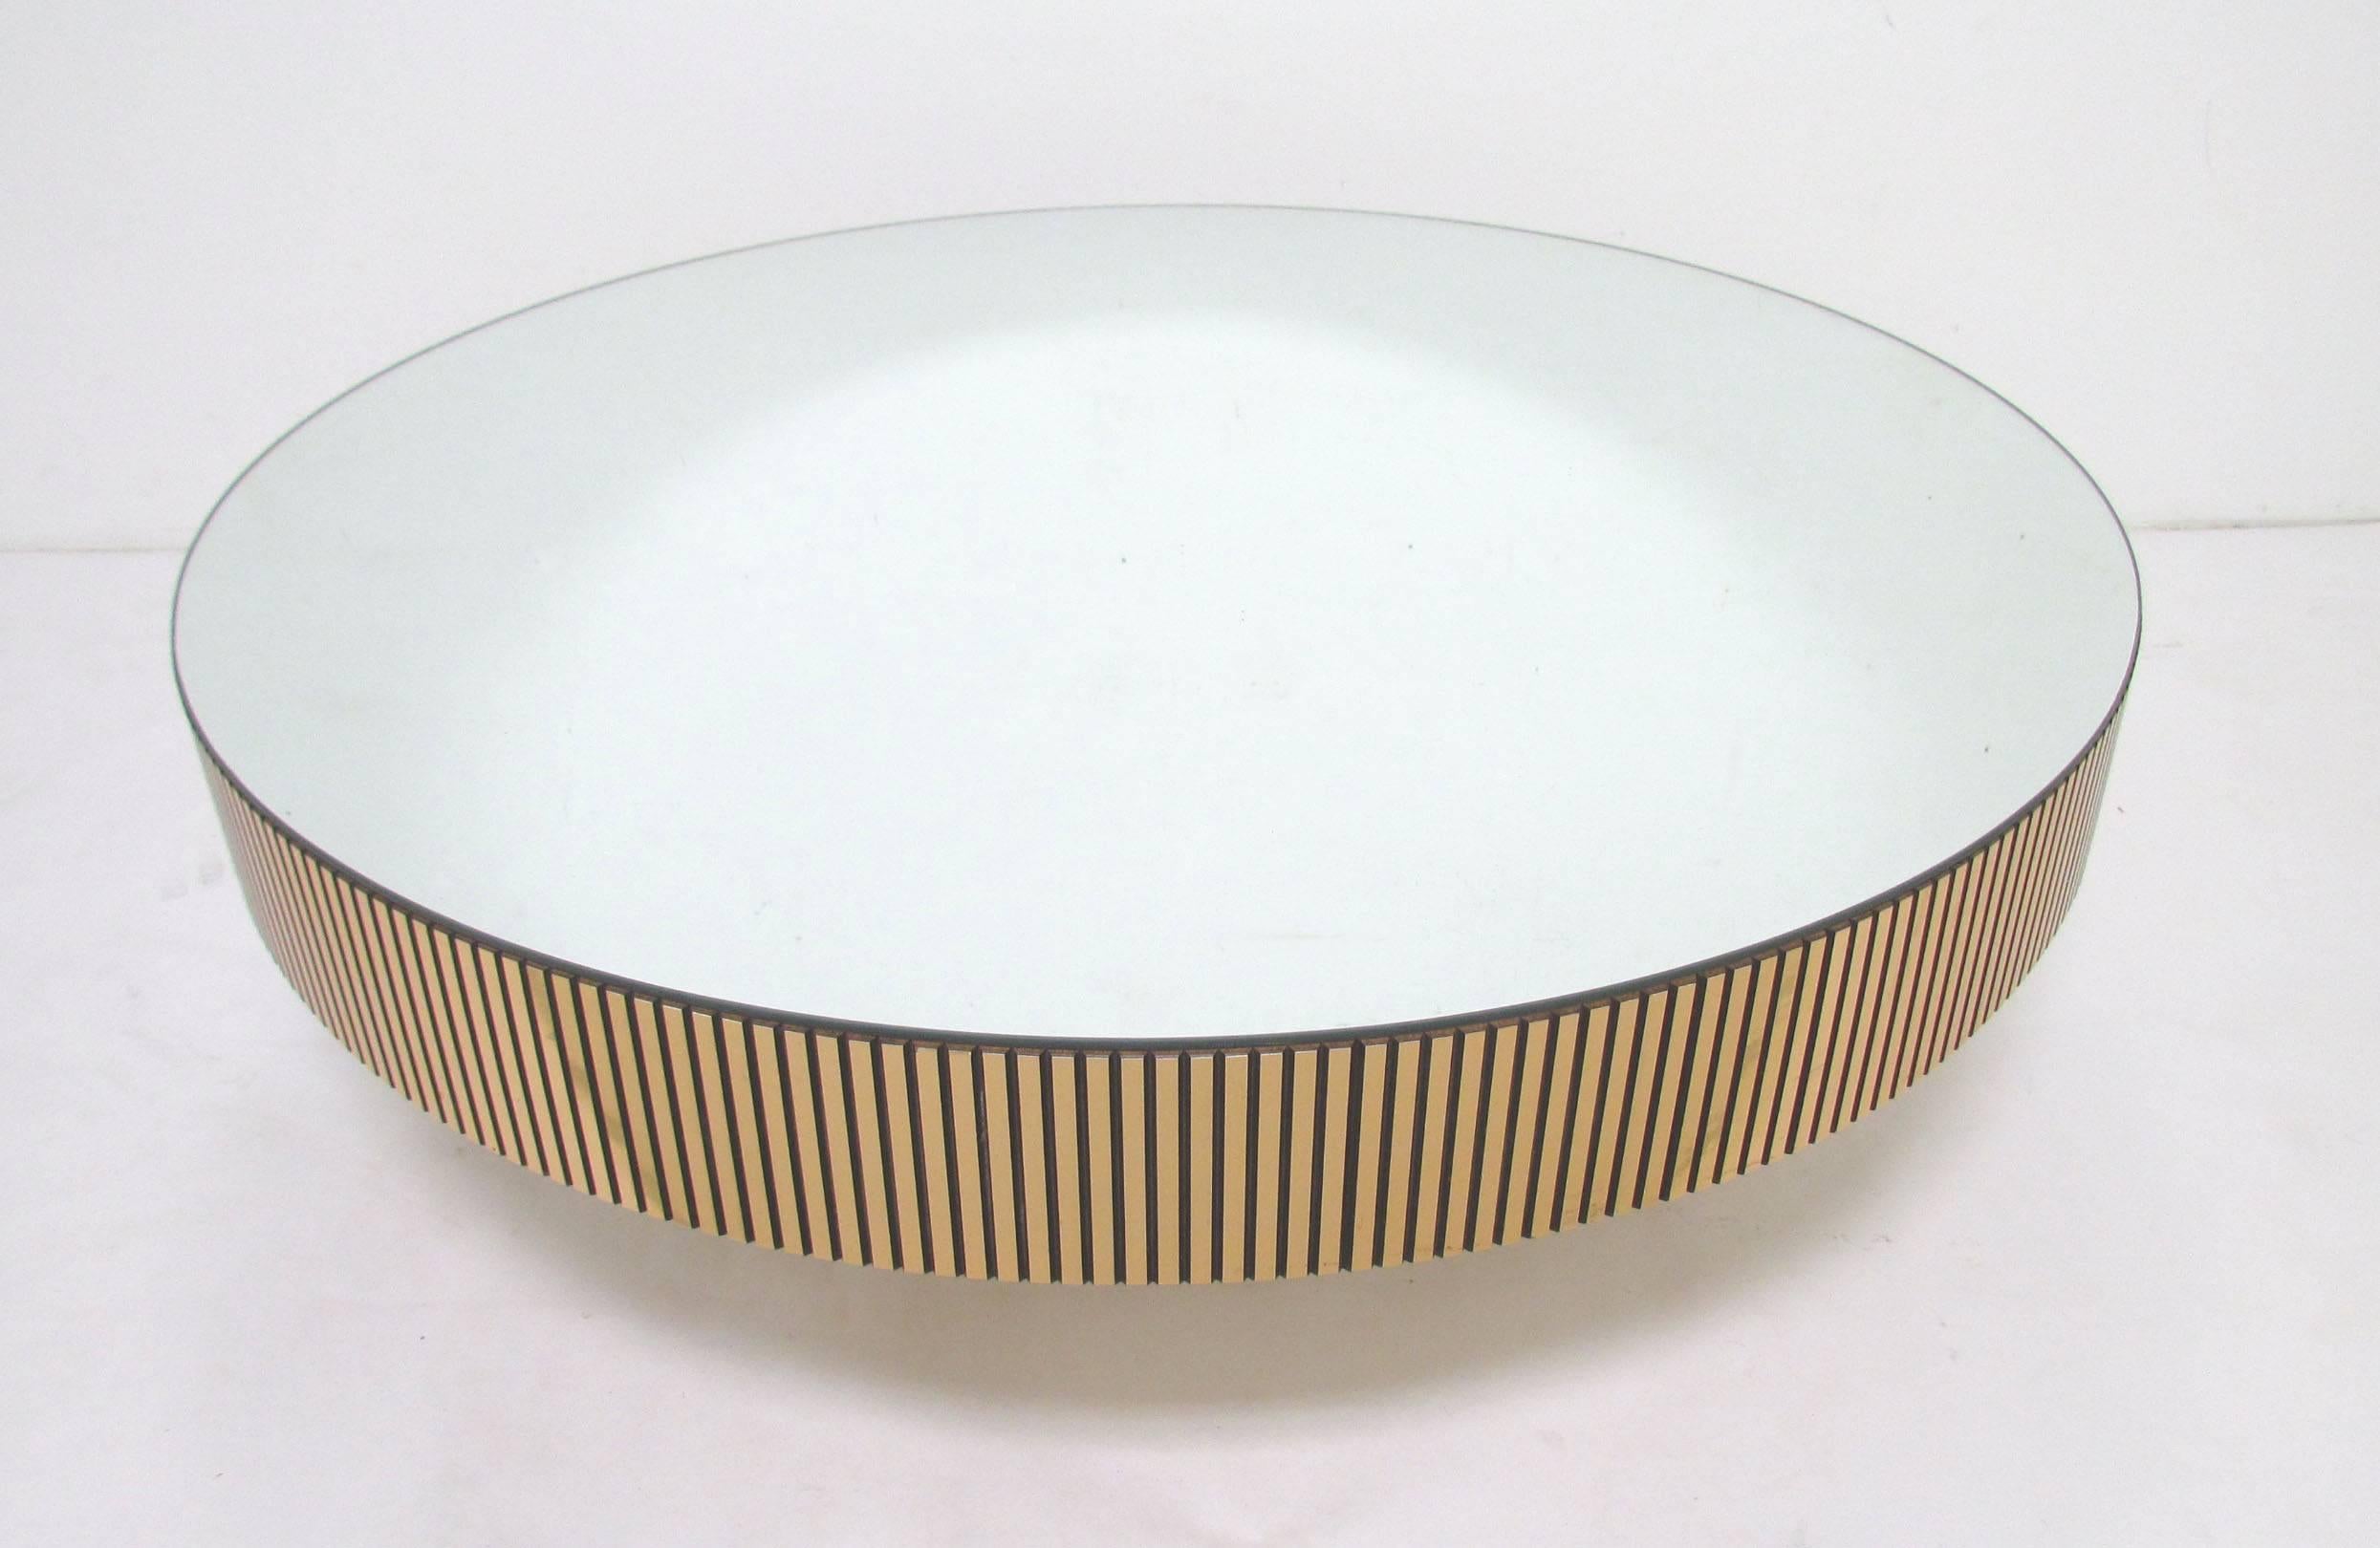 Mid-Century full-circle coffee table with mirrored top, and contrasting sides and pedestal base consisting of ribbed brass-toned strips. Attributed to Ello, circa 1970s.